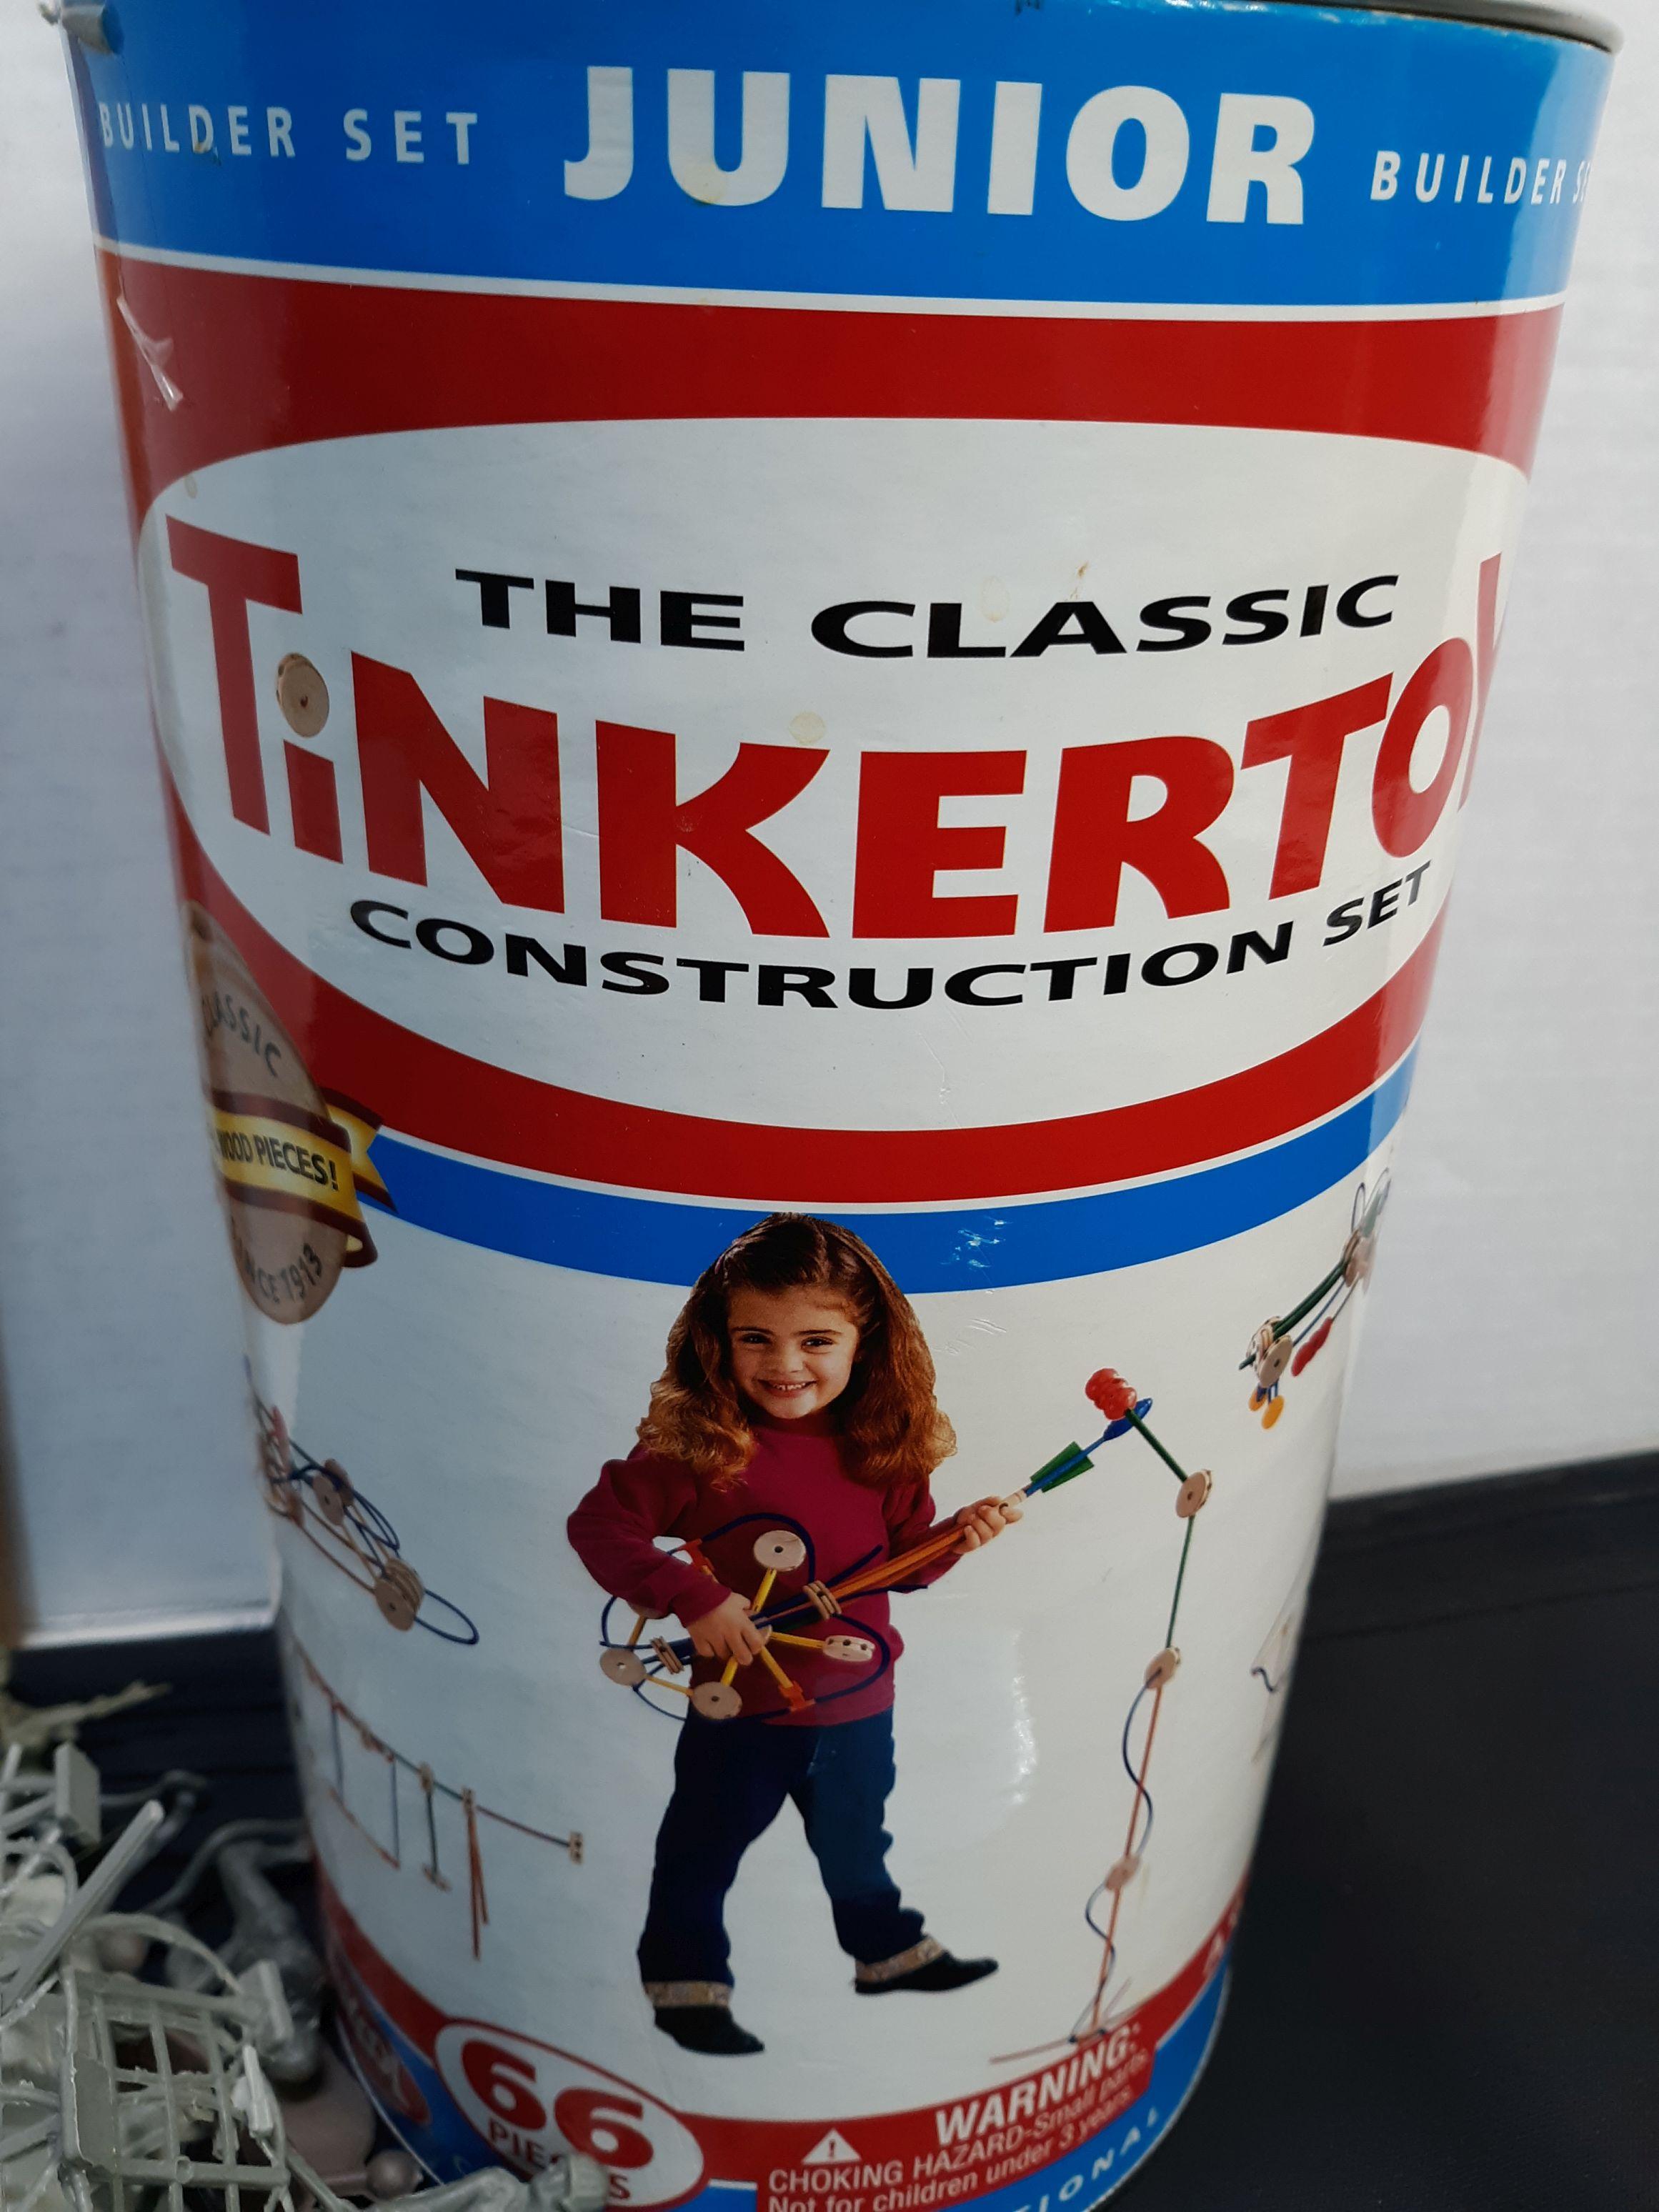 Tinker Toy container, bag of army men